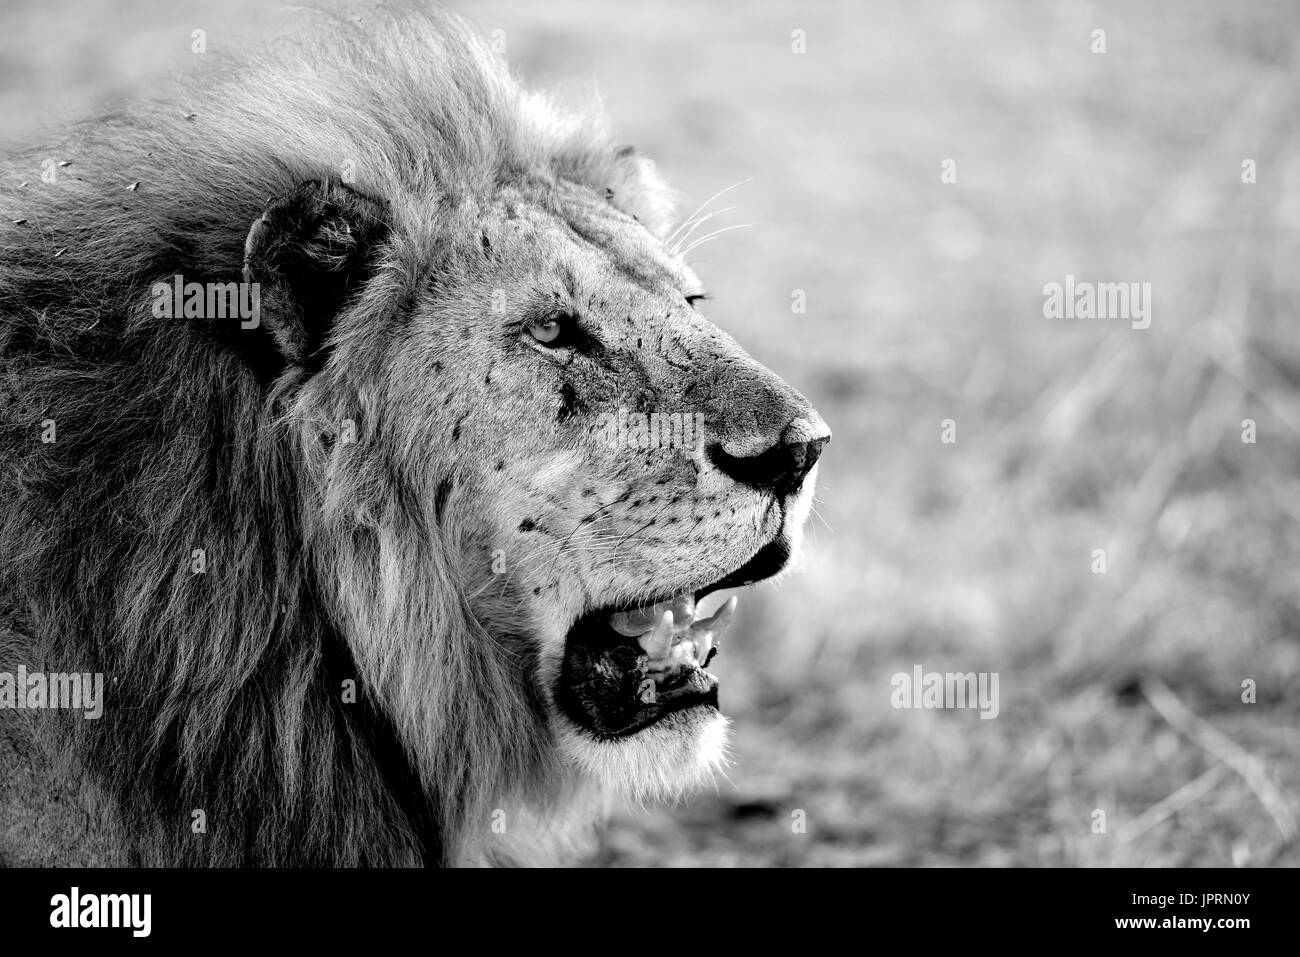 The king of the Serengeti, the lion rest in the afternoon shade. Stock Photo